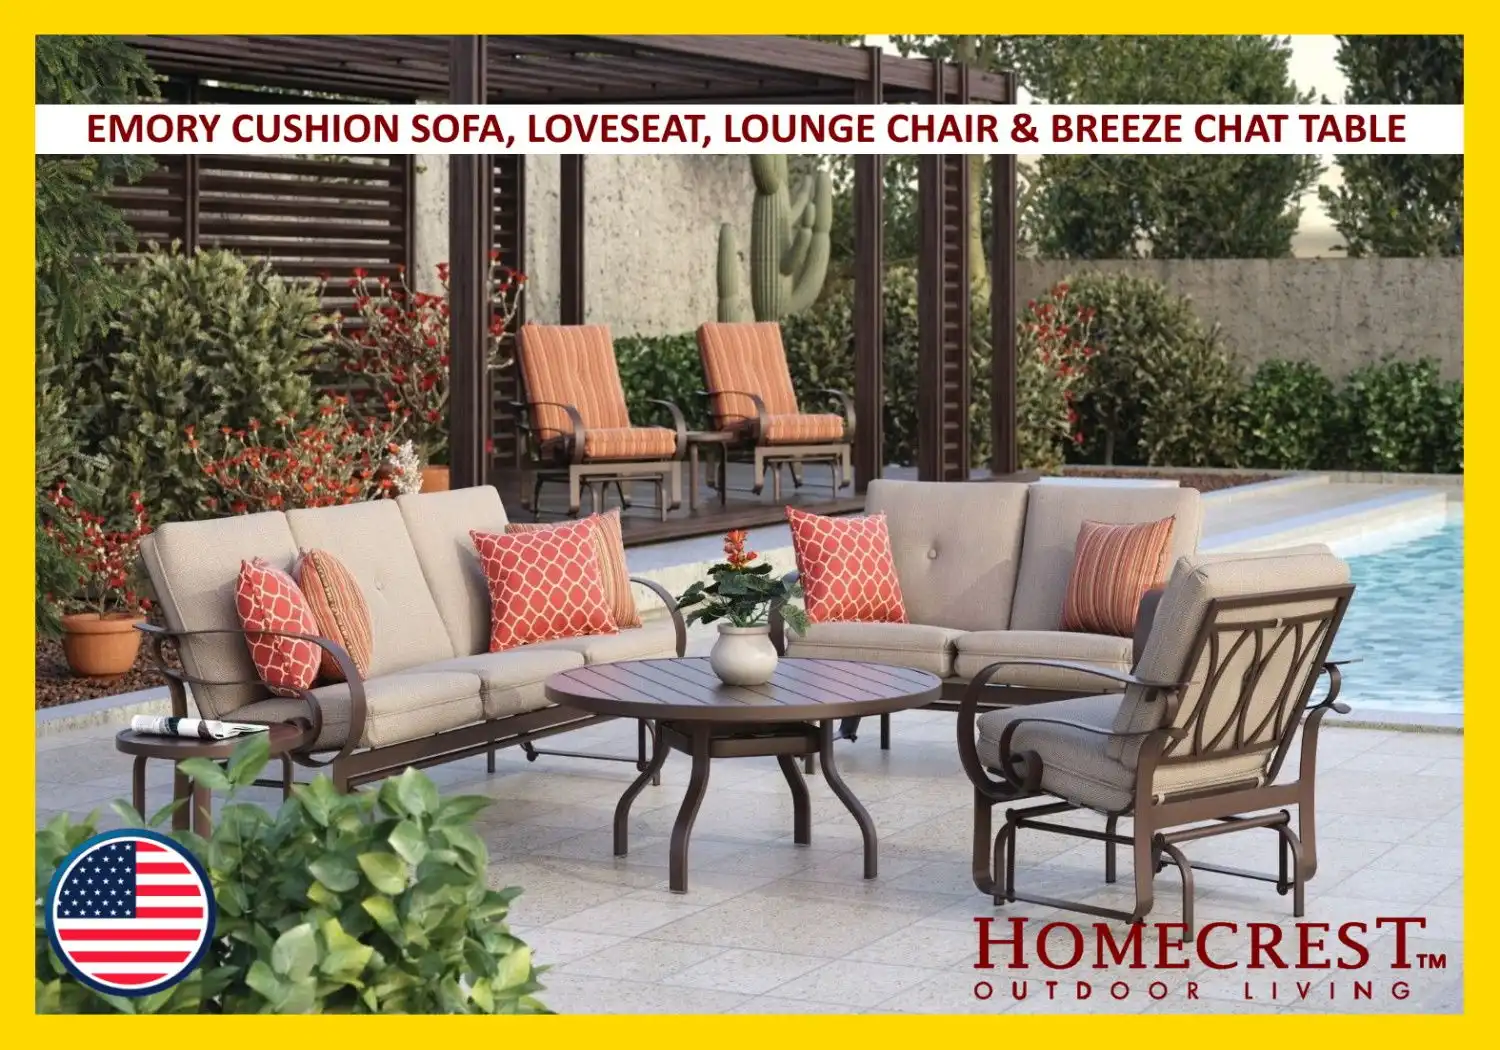 EMORY CUSHION SOFA, LOVESEAT, LOUNGE CHAIR & BREEZE CHAT TABLE